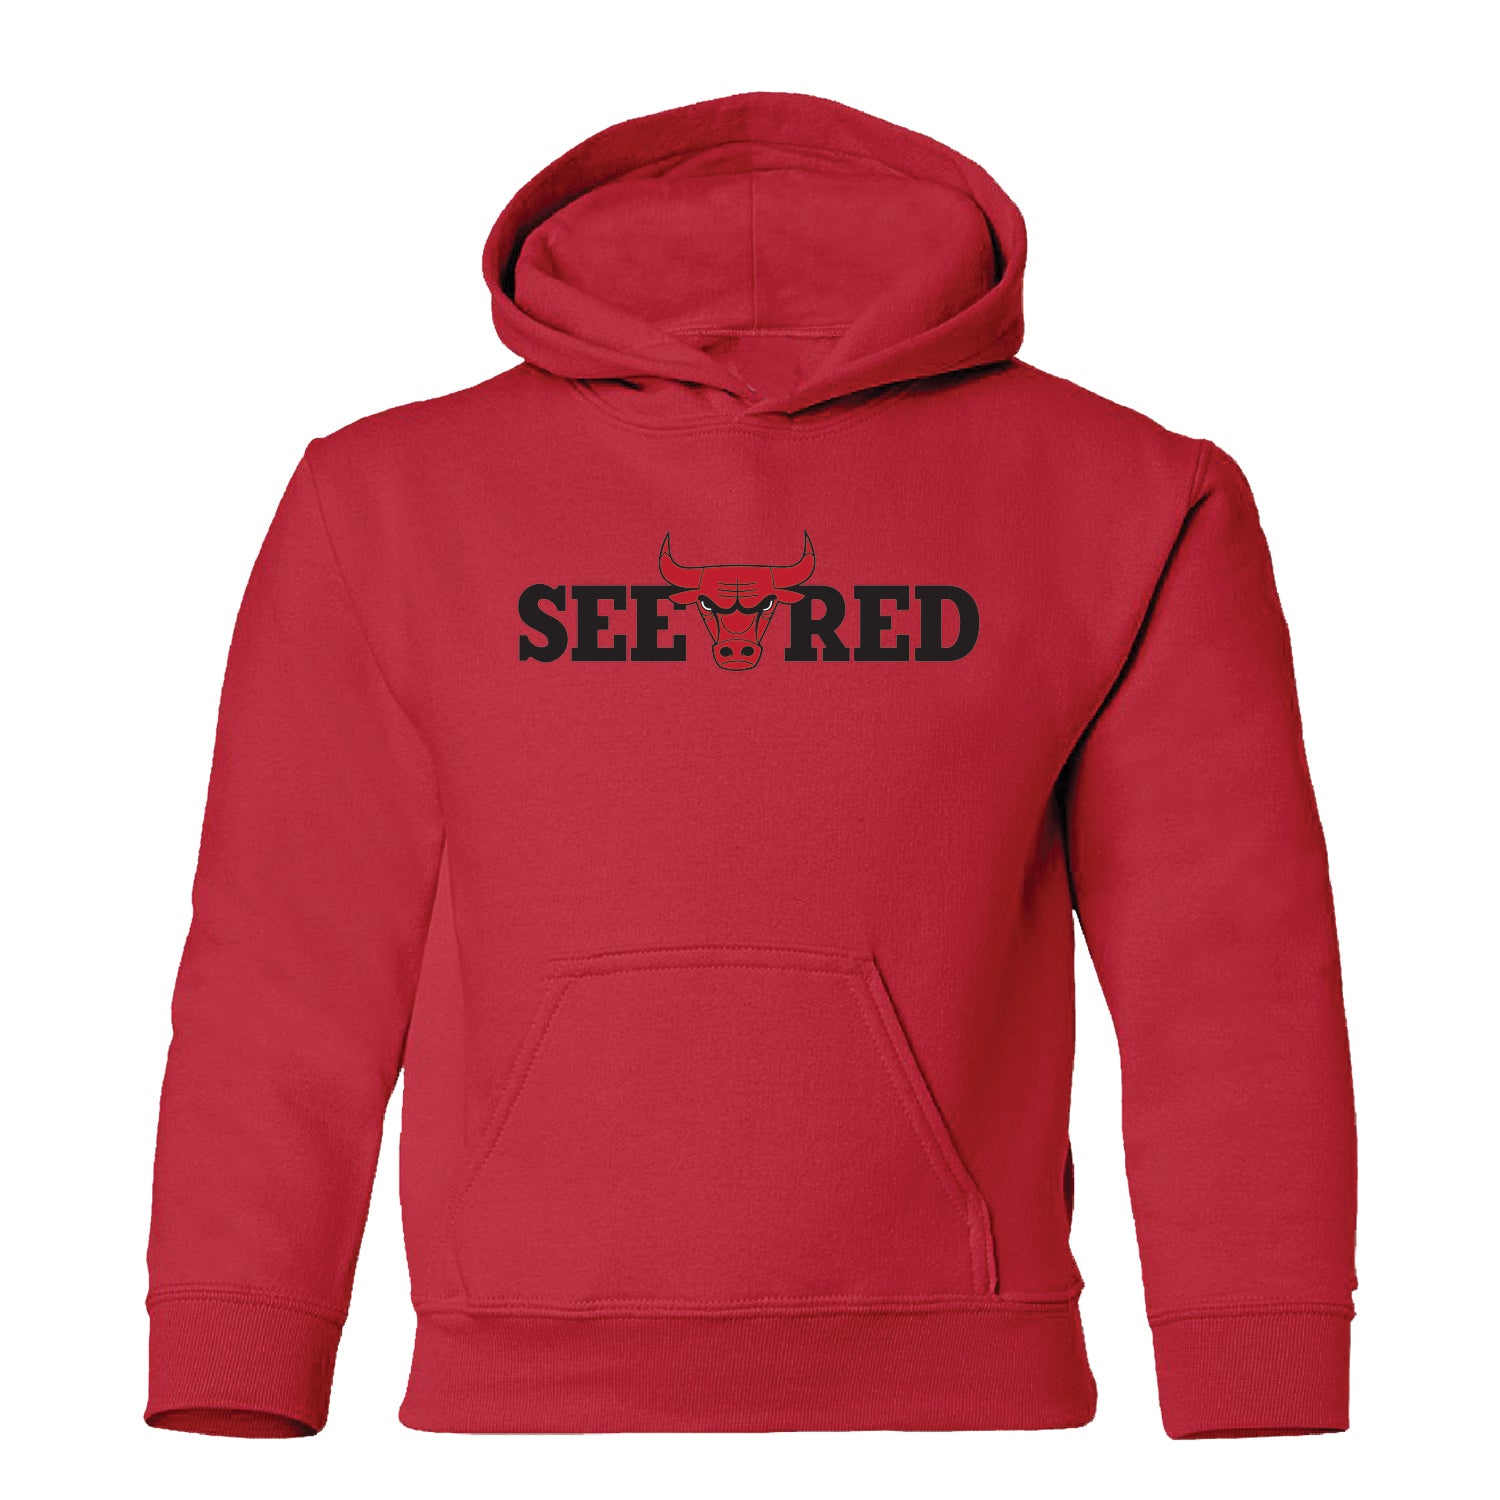 Youth Chicago Bulls See Red Hooded Sweatshirt in red - front view